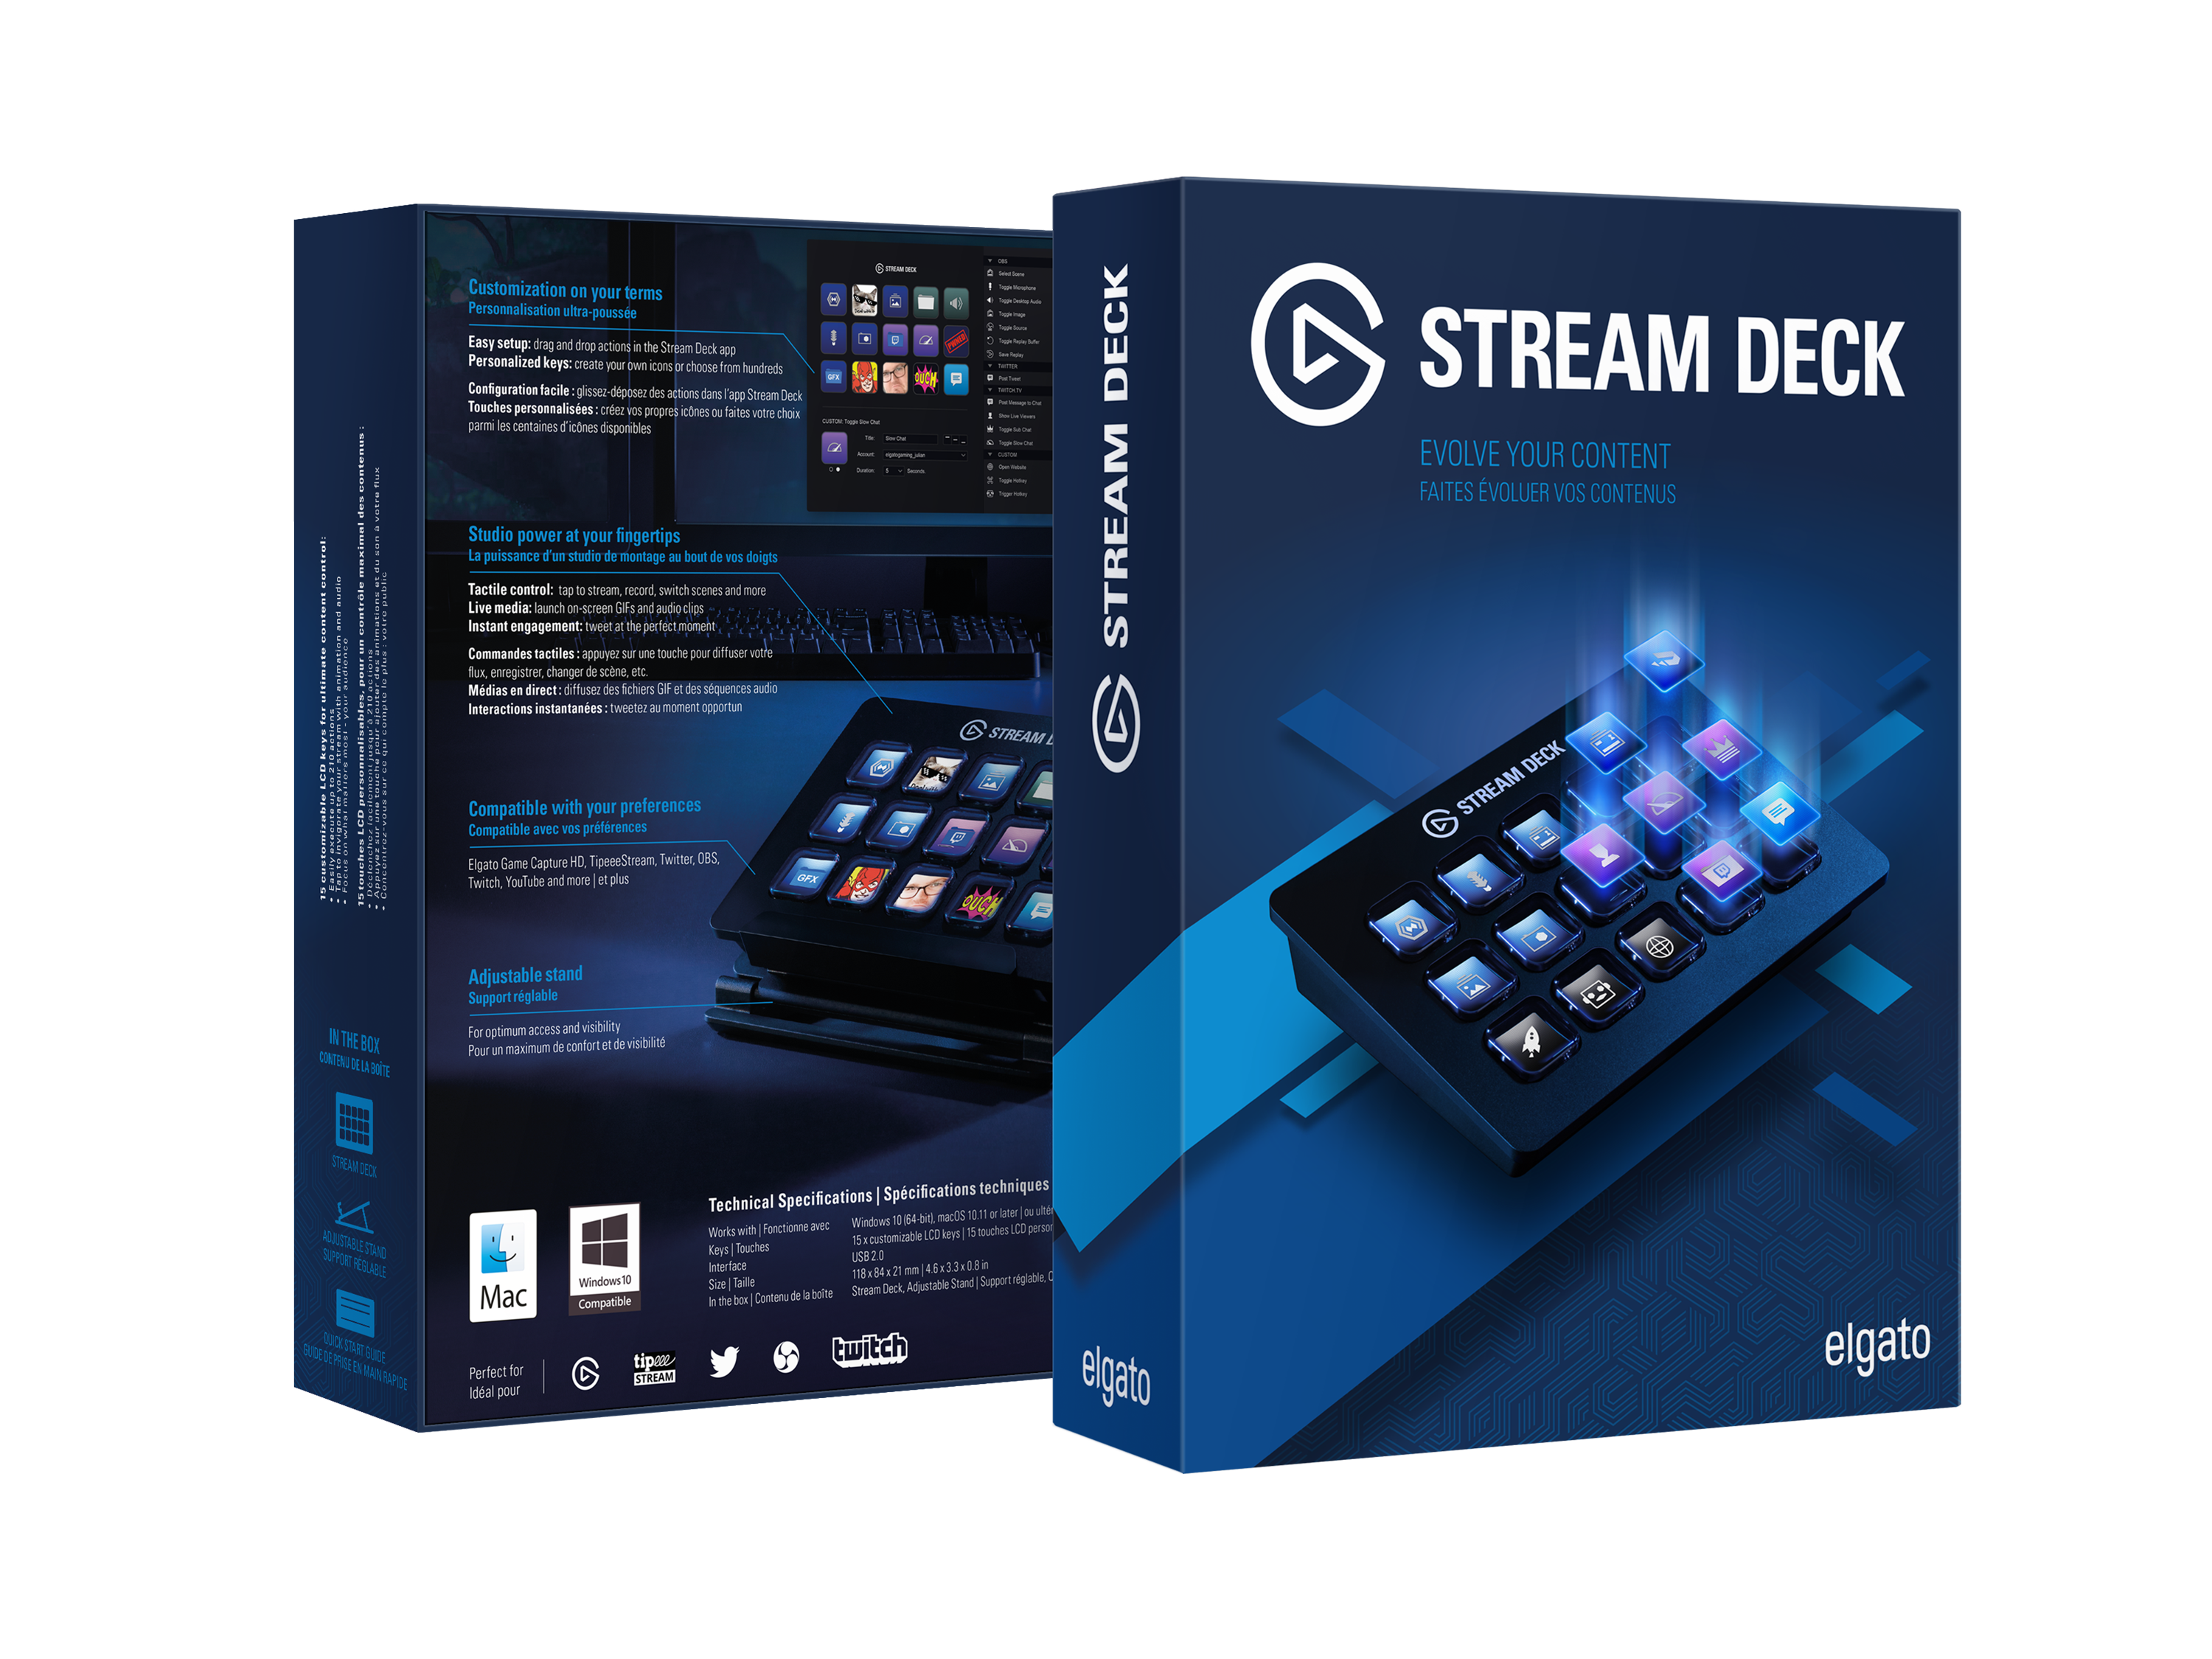 Stream Deck + review: helpful and fun tool for content creators